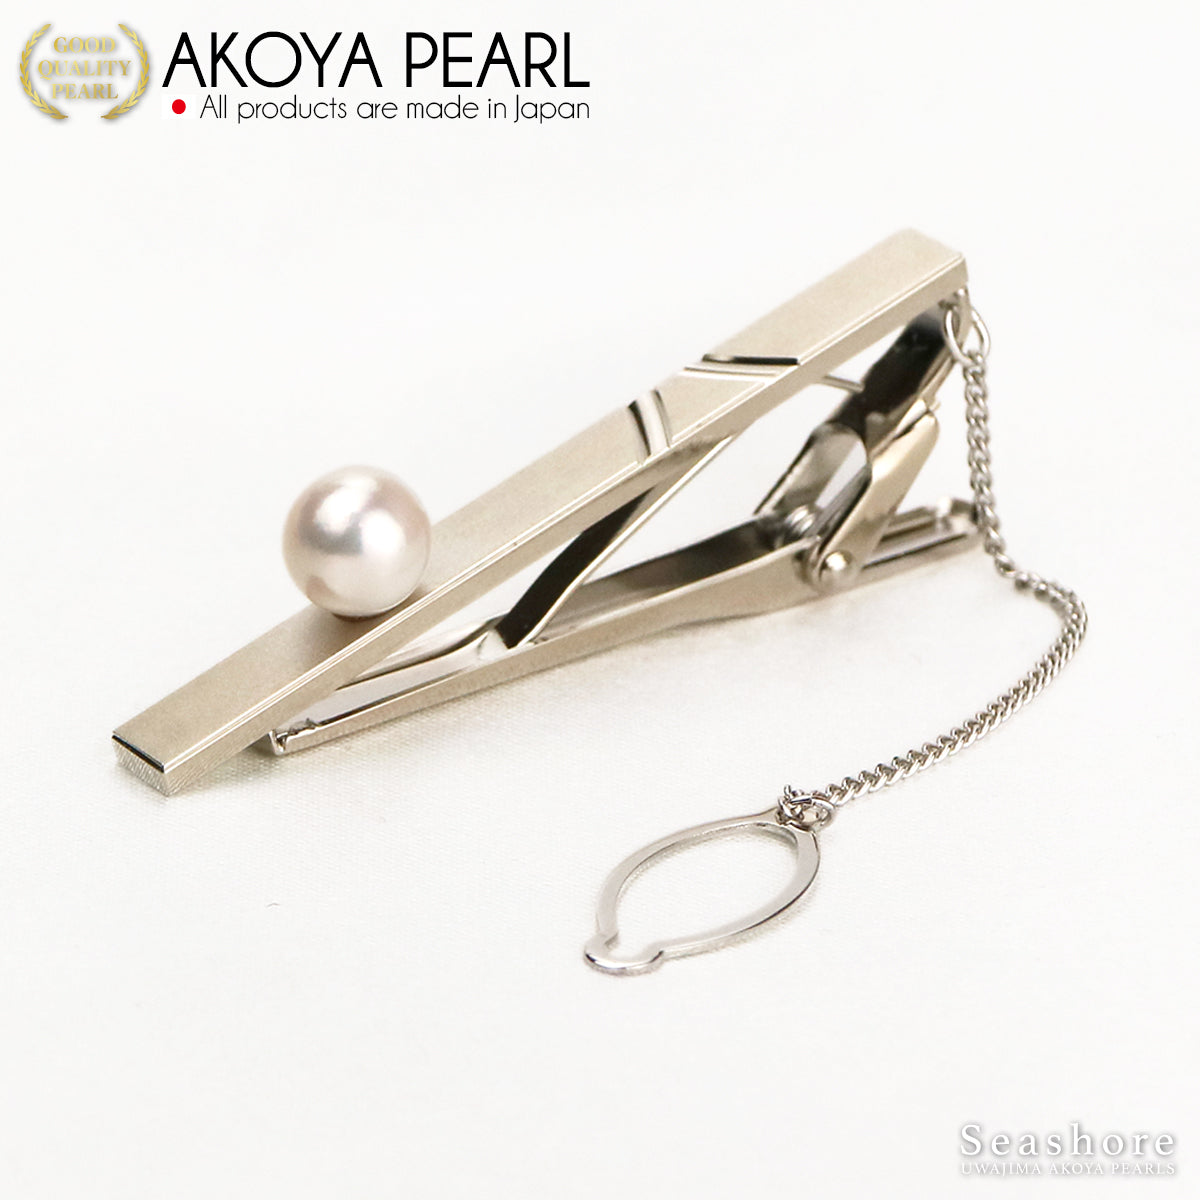 Pearl Tie Pin Tie Bar Men's Brass White 7.5-8.0mm Akoya Pearl Storage Case Included (3930)